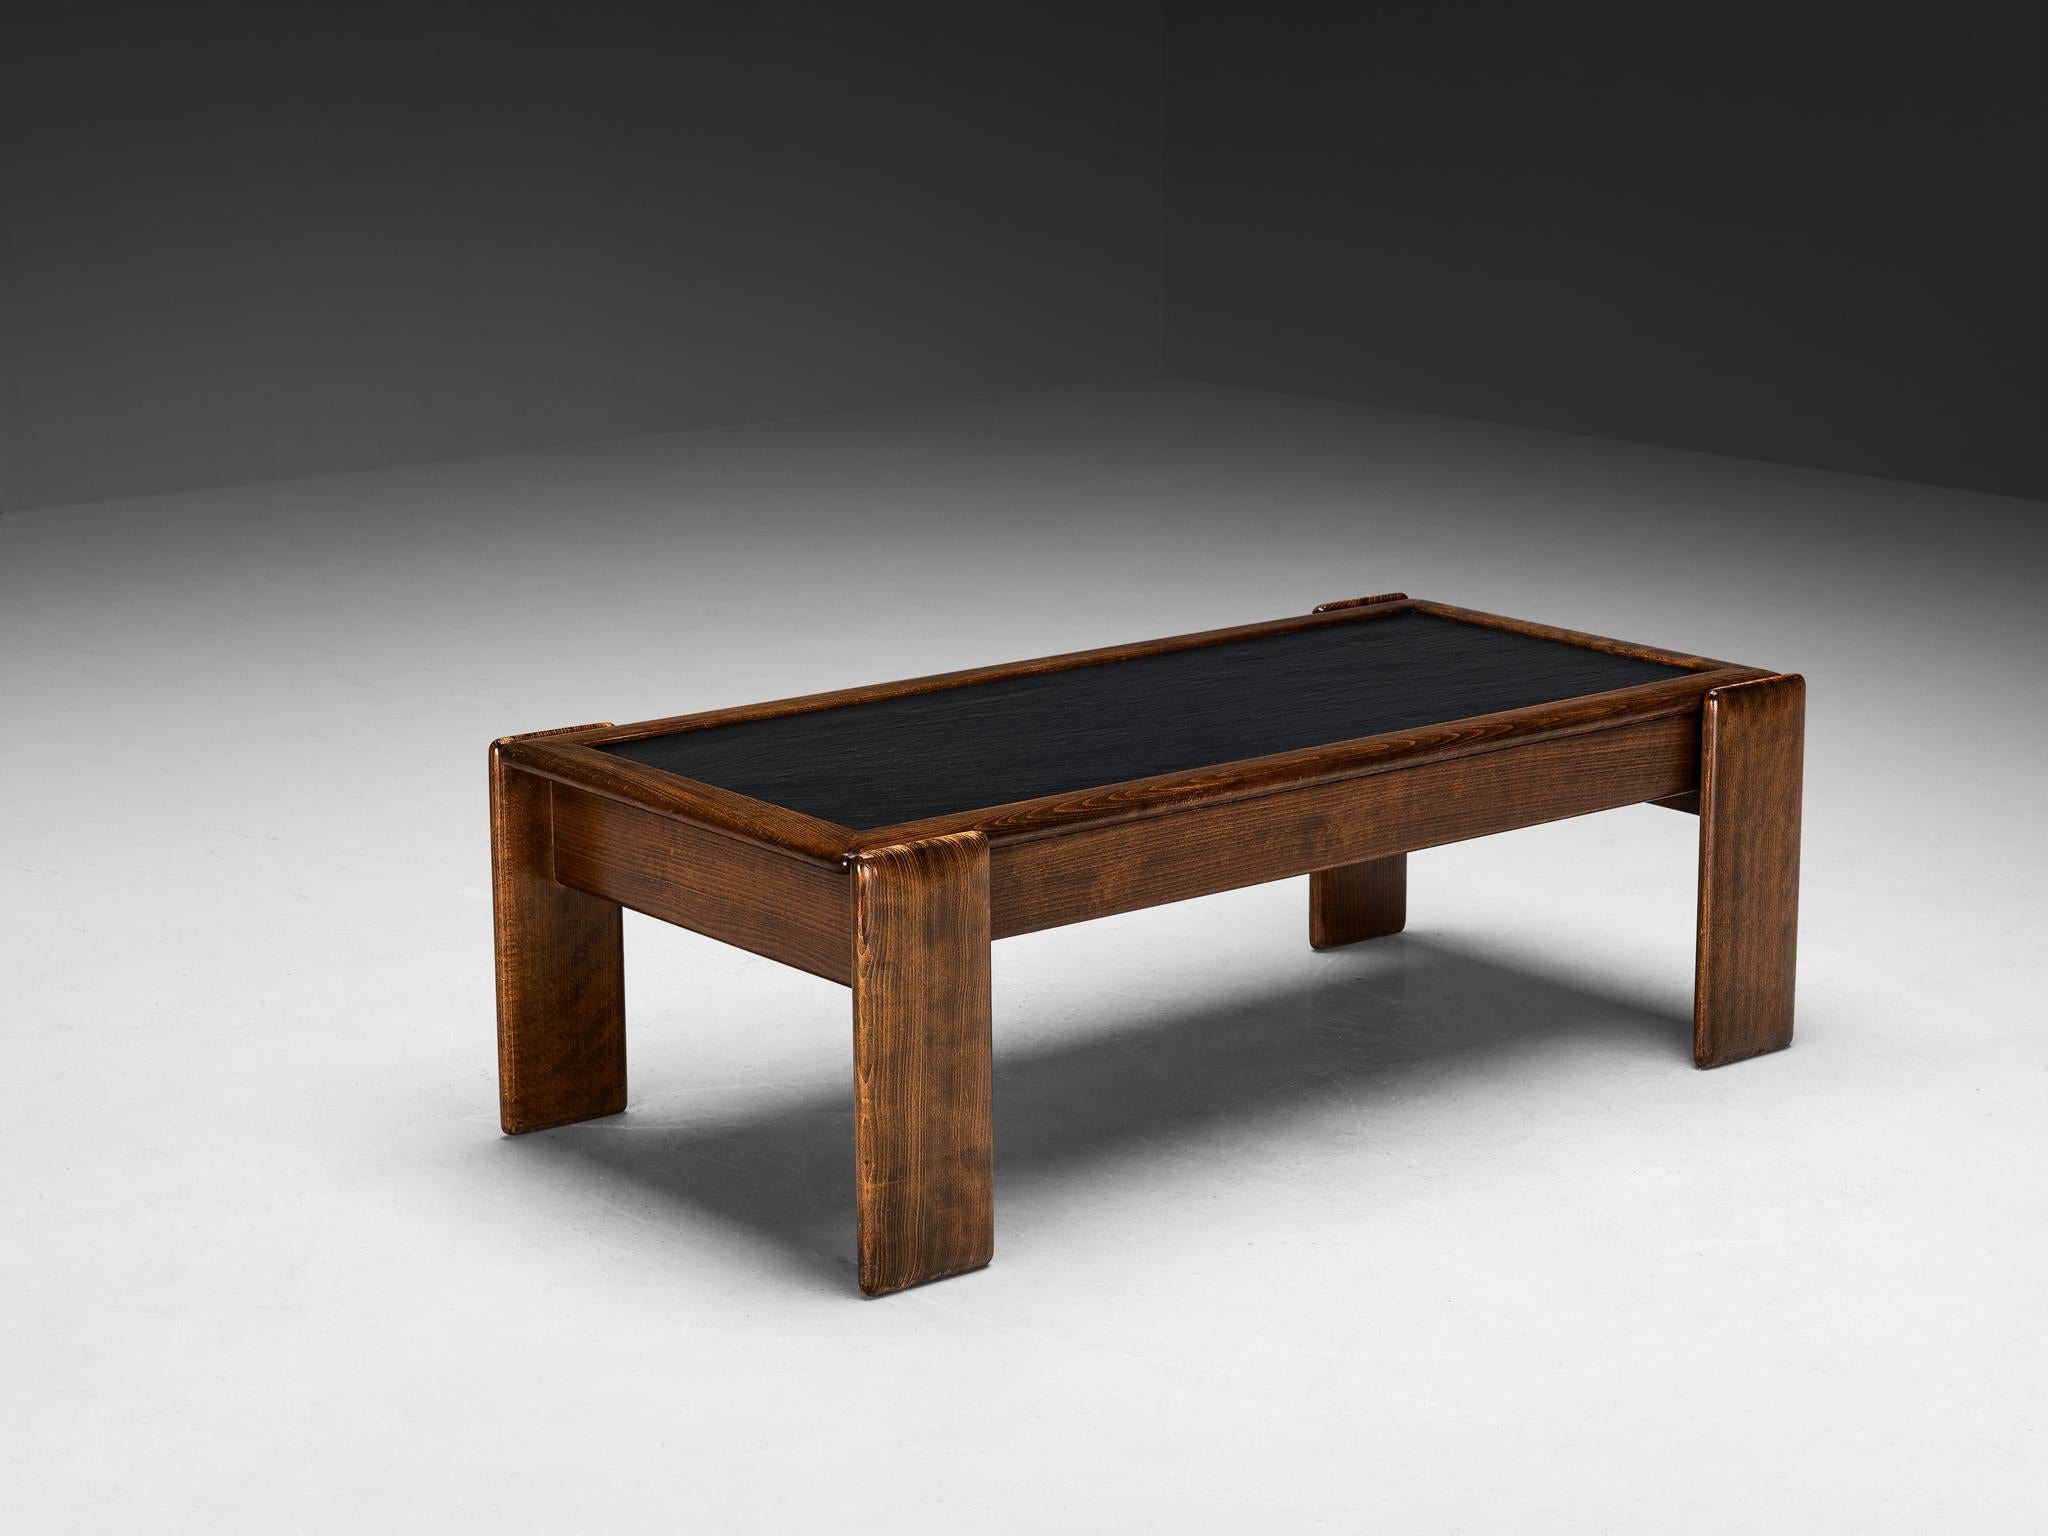 Coffee table, oak, cleft slate, The Netherlands, 1970s

A sleek coffee table with a well-designed frame featuring clear lines and concise geometric shapes. The style reminds of the 'Bastiano' series by Afra & Tobia Scarpa designed in 1960. The